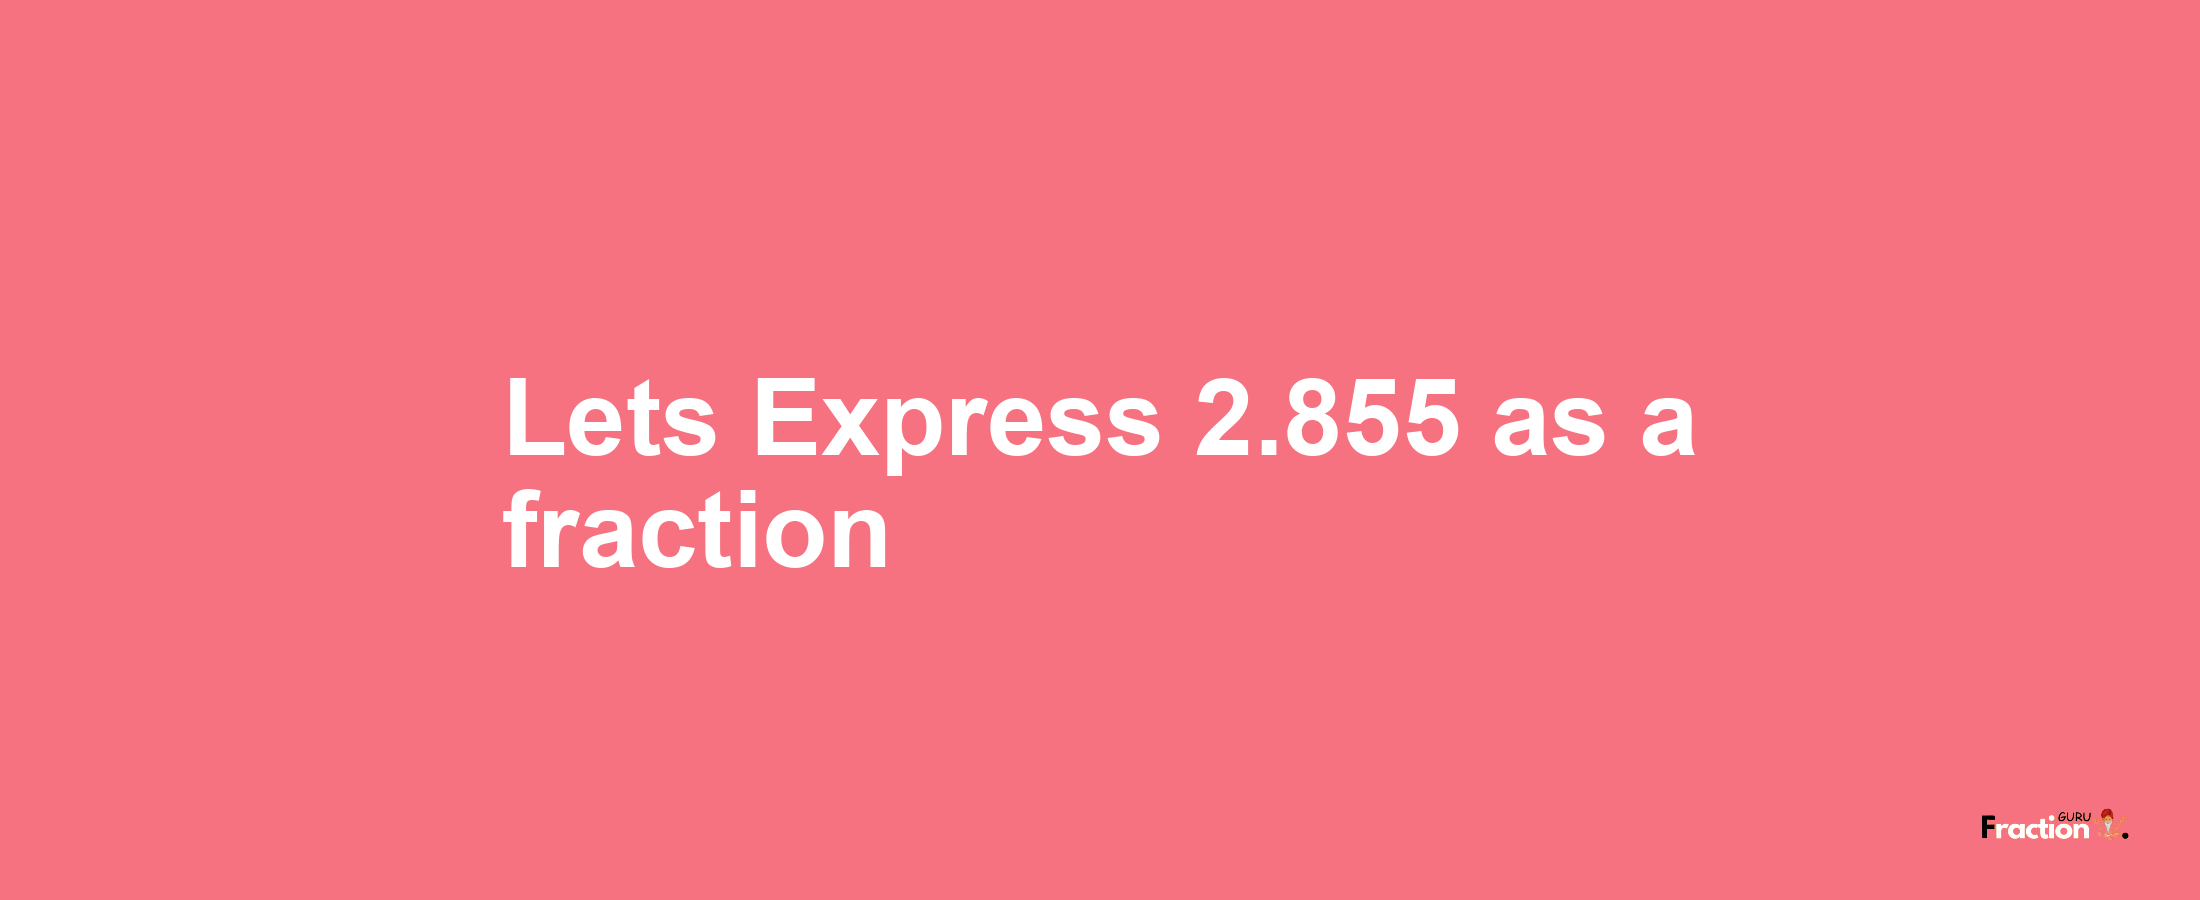 Lets Express 2.855 as afraction